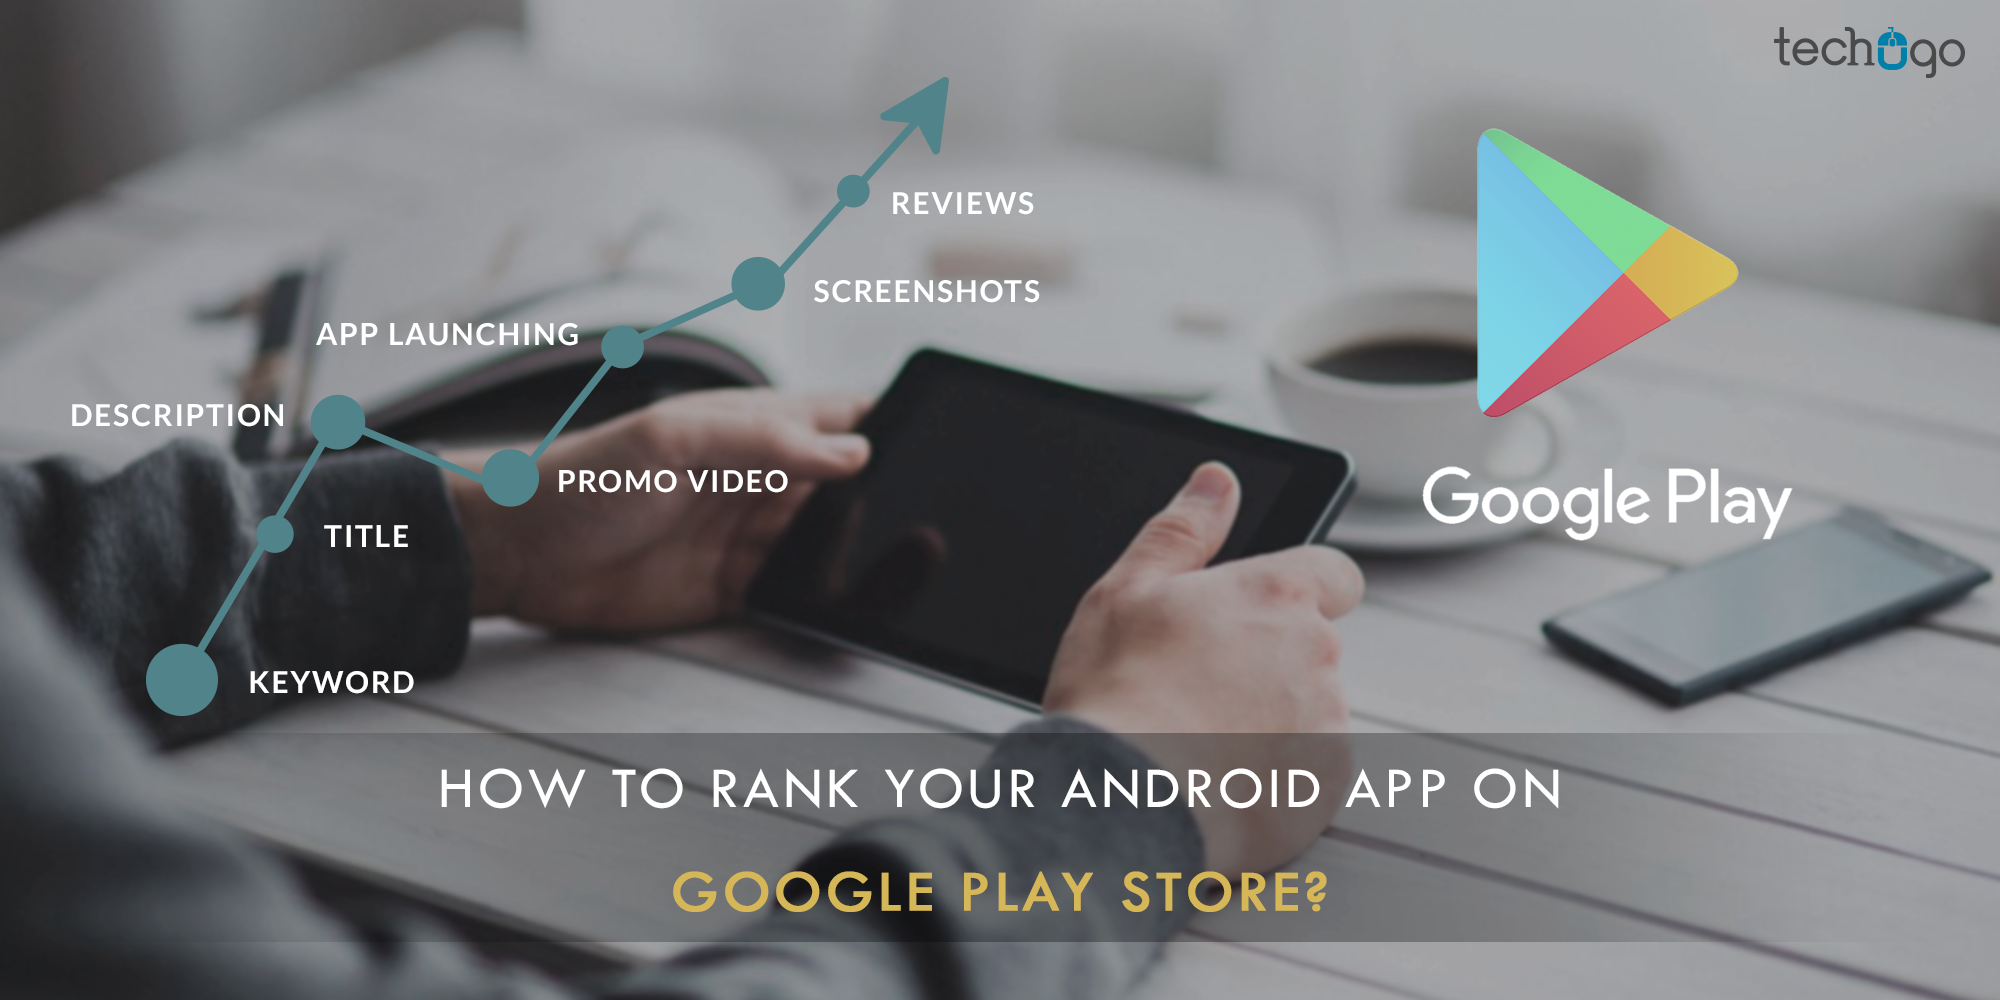 How To Rank Your Android App On Google Play Store?